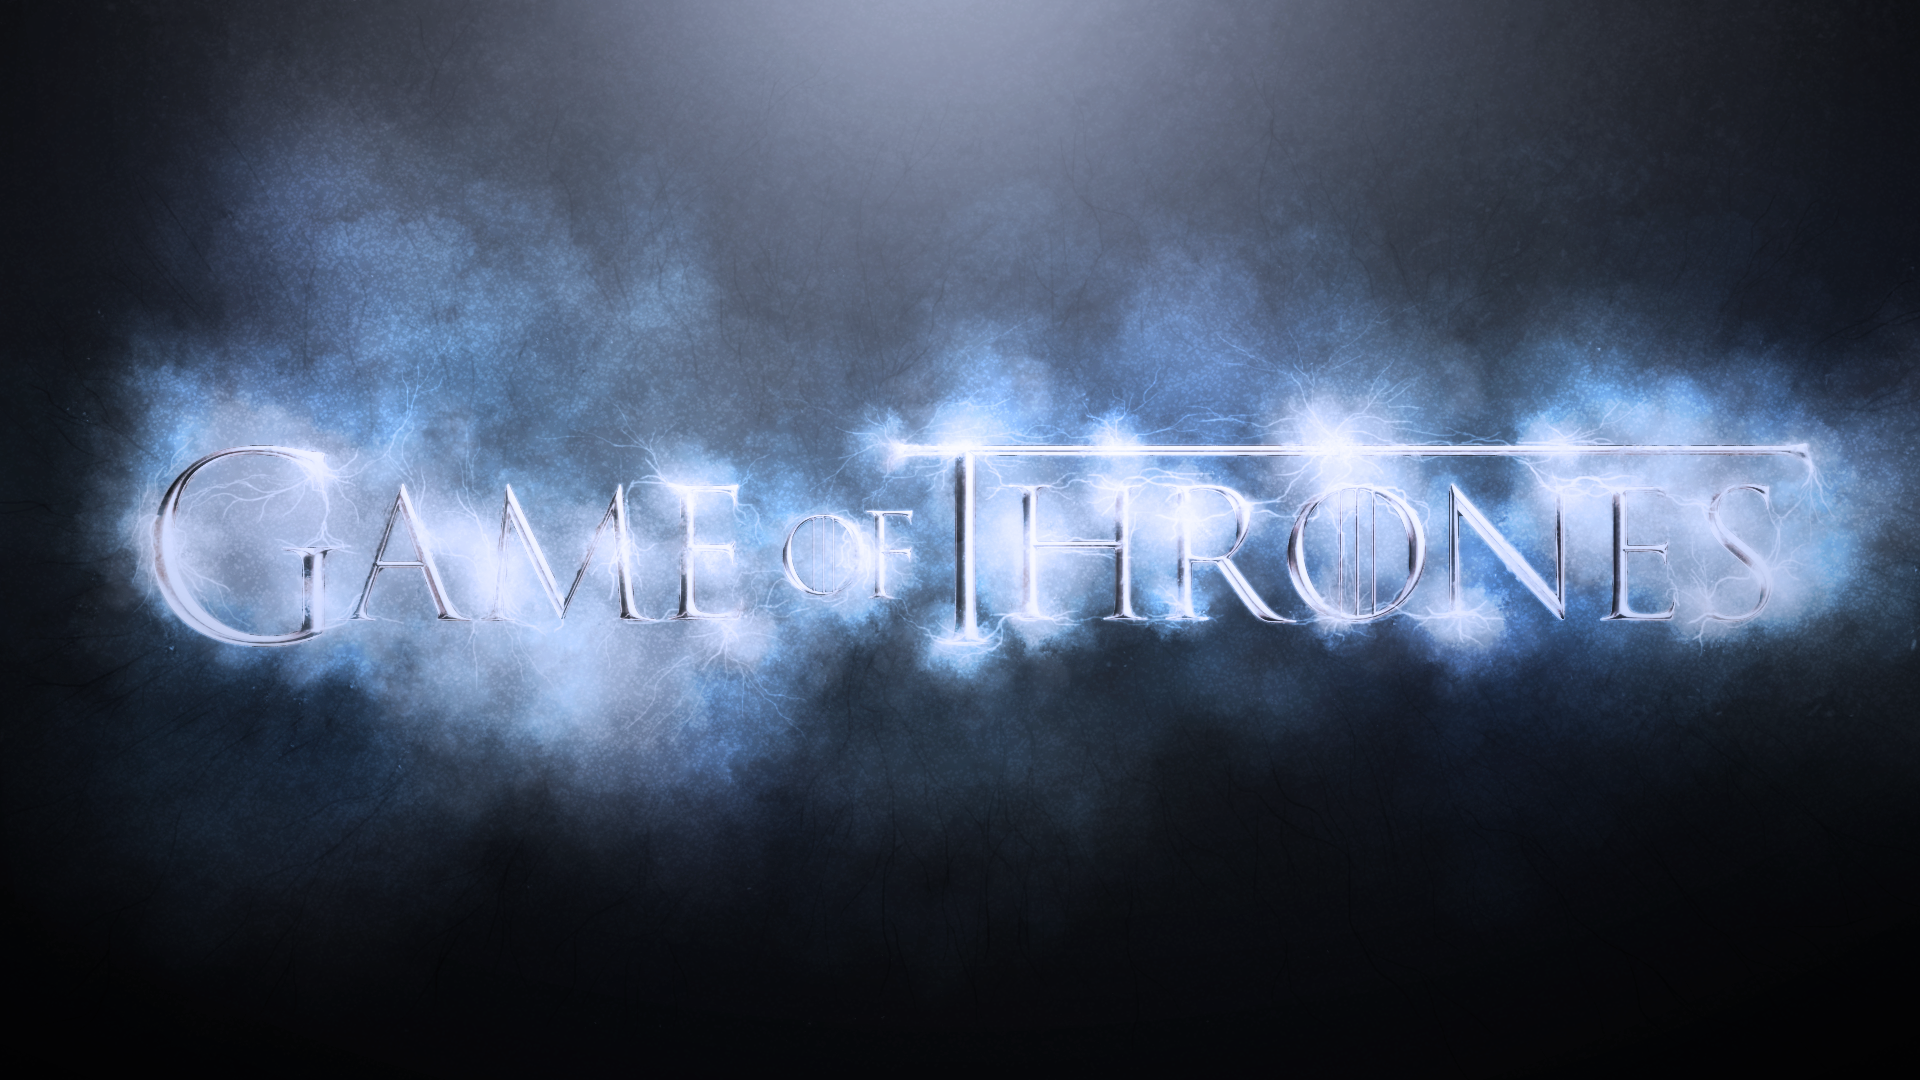 Game Of Thrones Winter Is Coming By Sandwichhorsearchive On